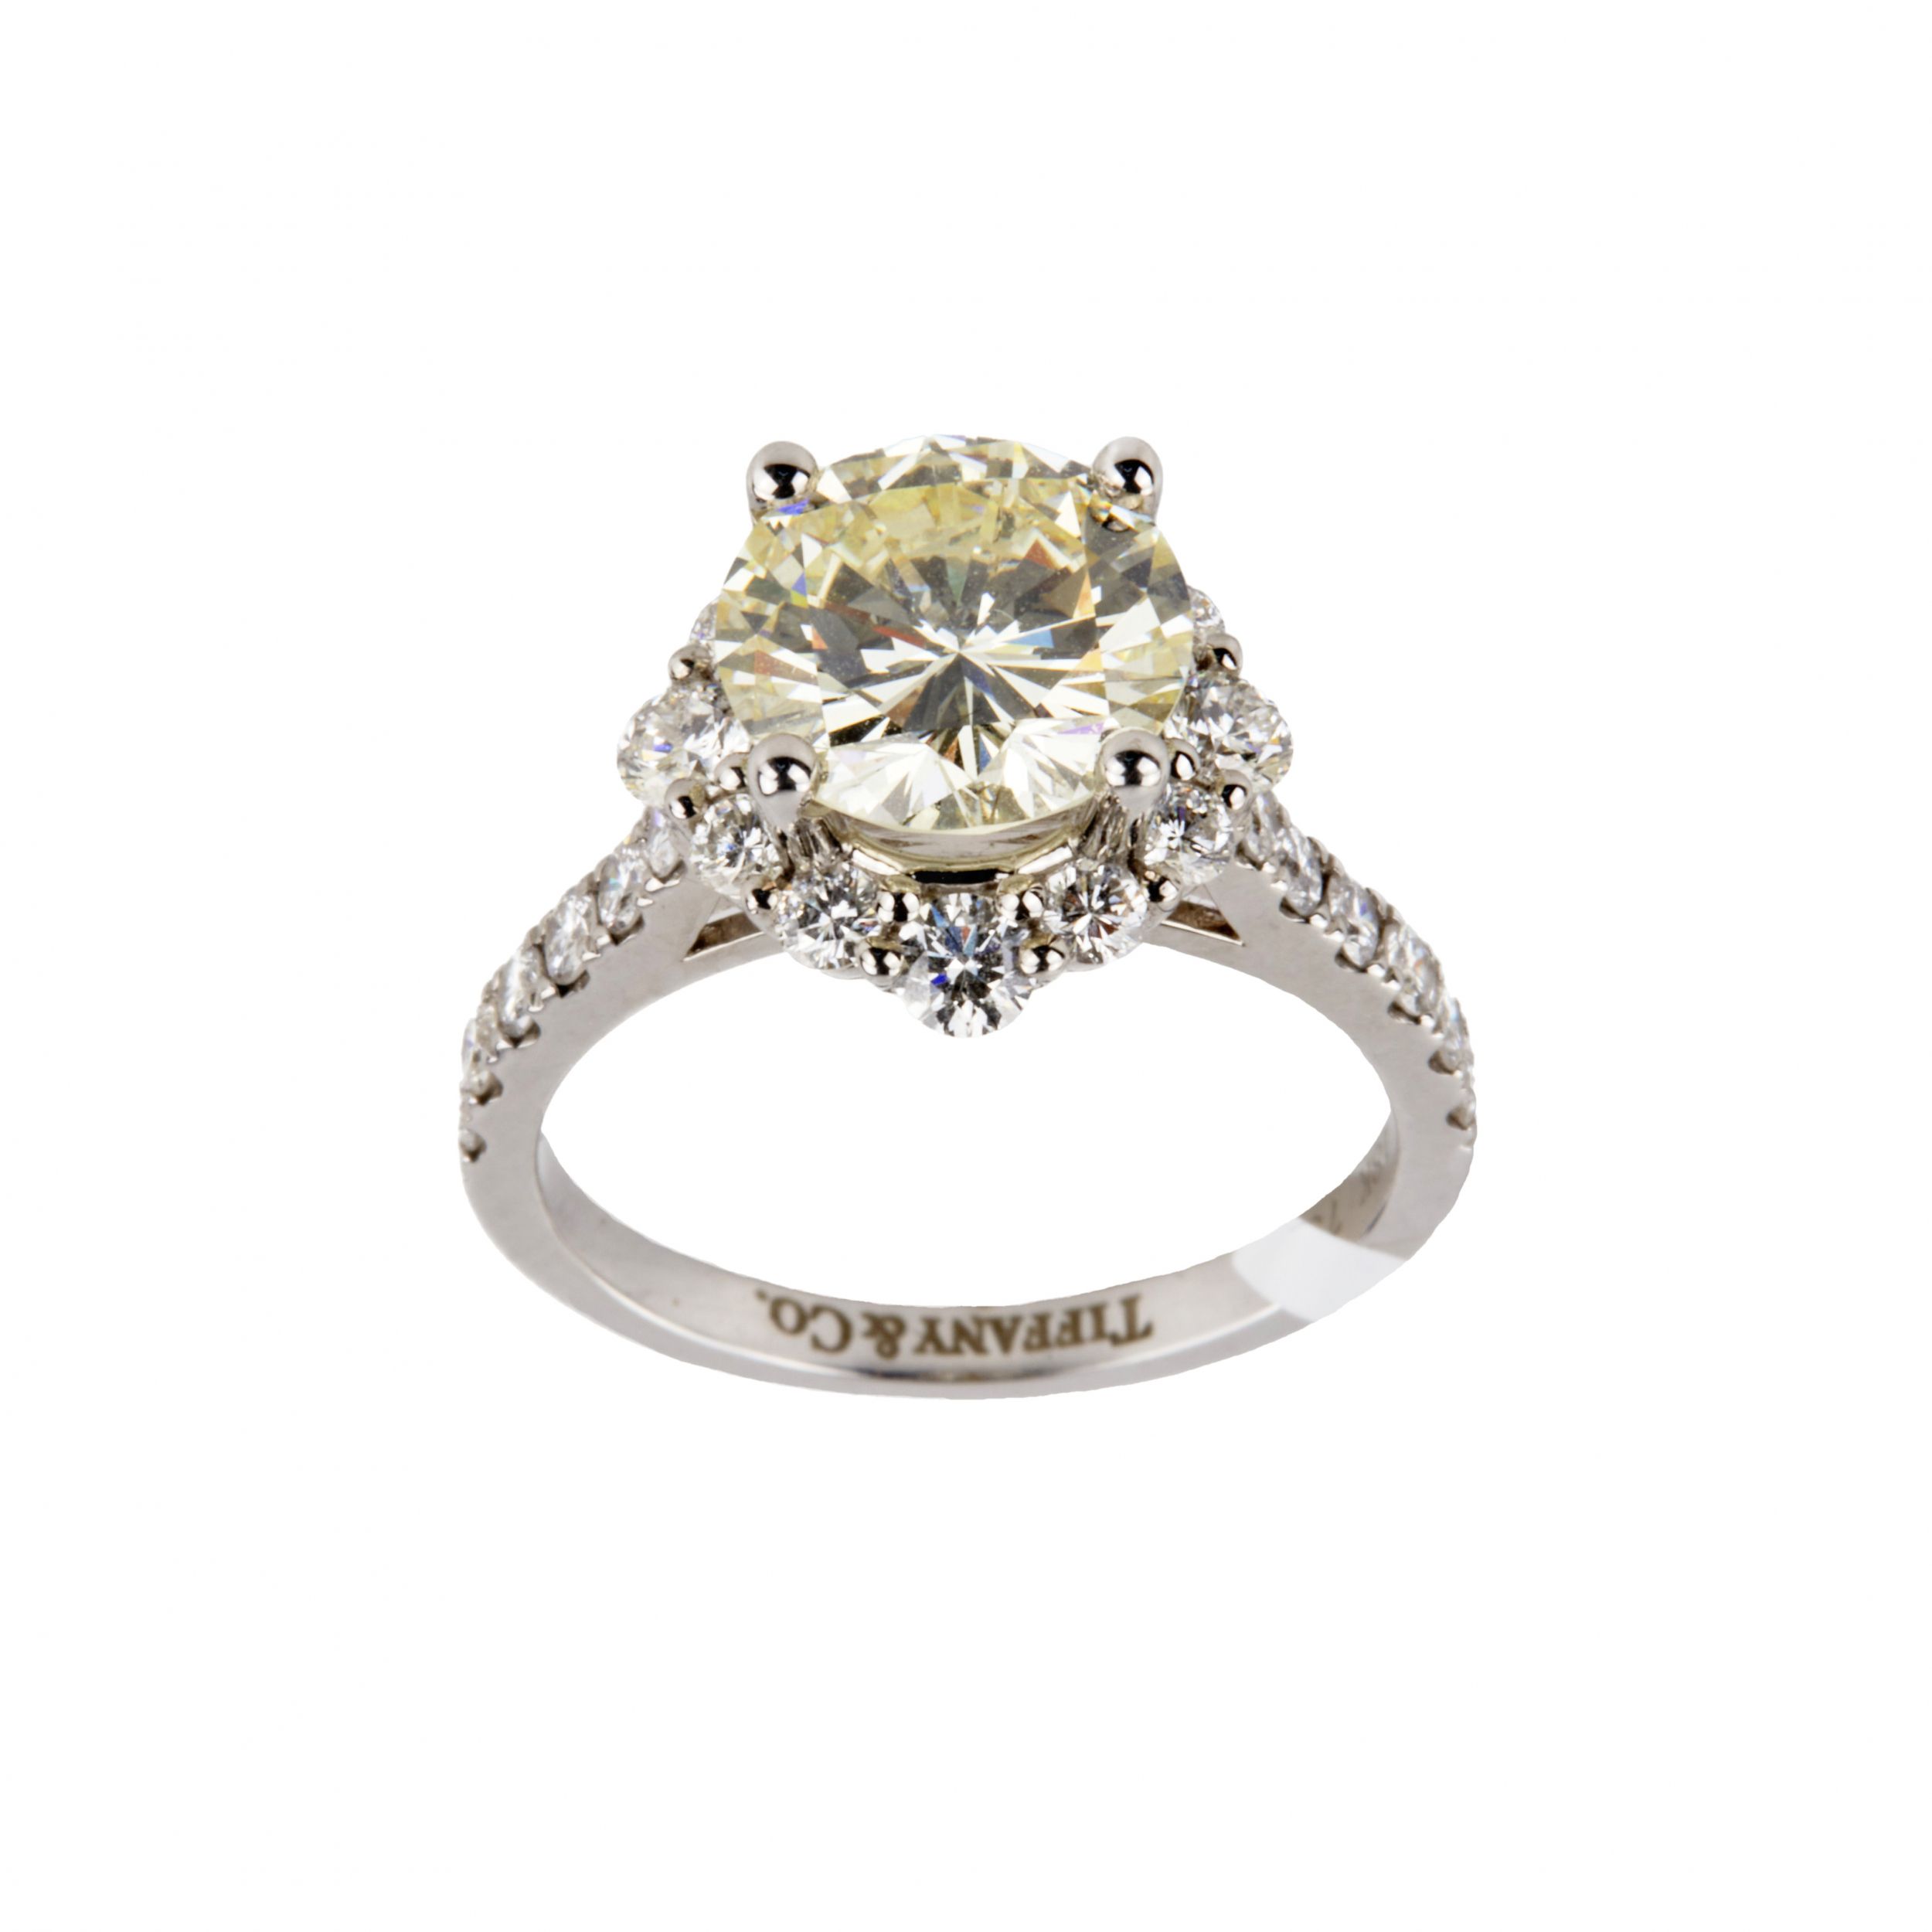 Engagement-gold-ring-with-diamonds-27-ct-